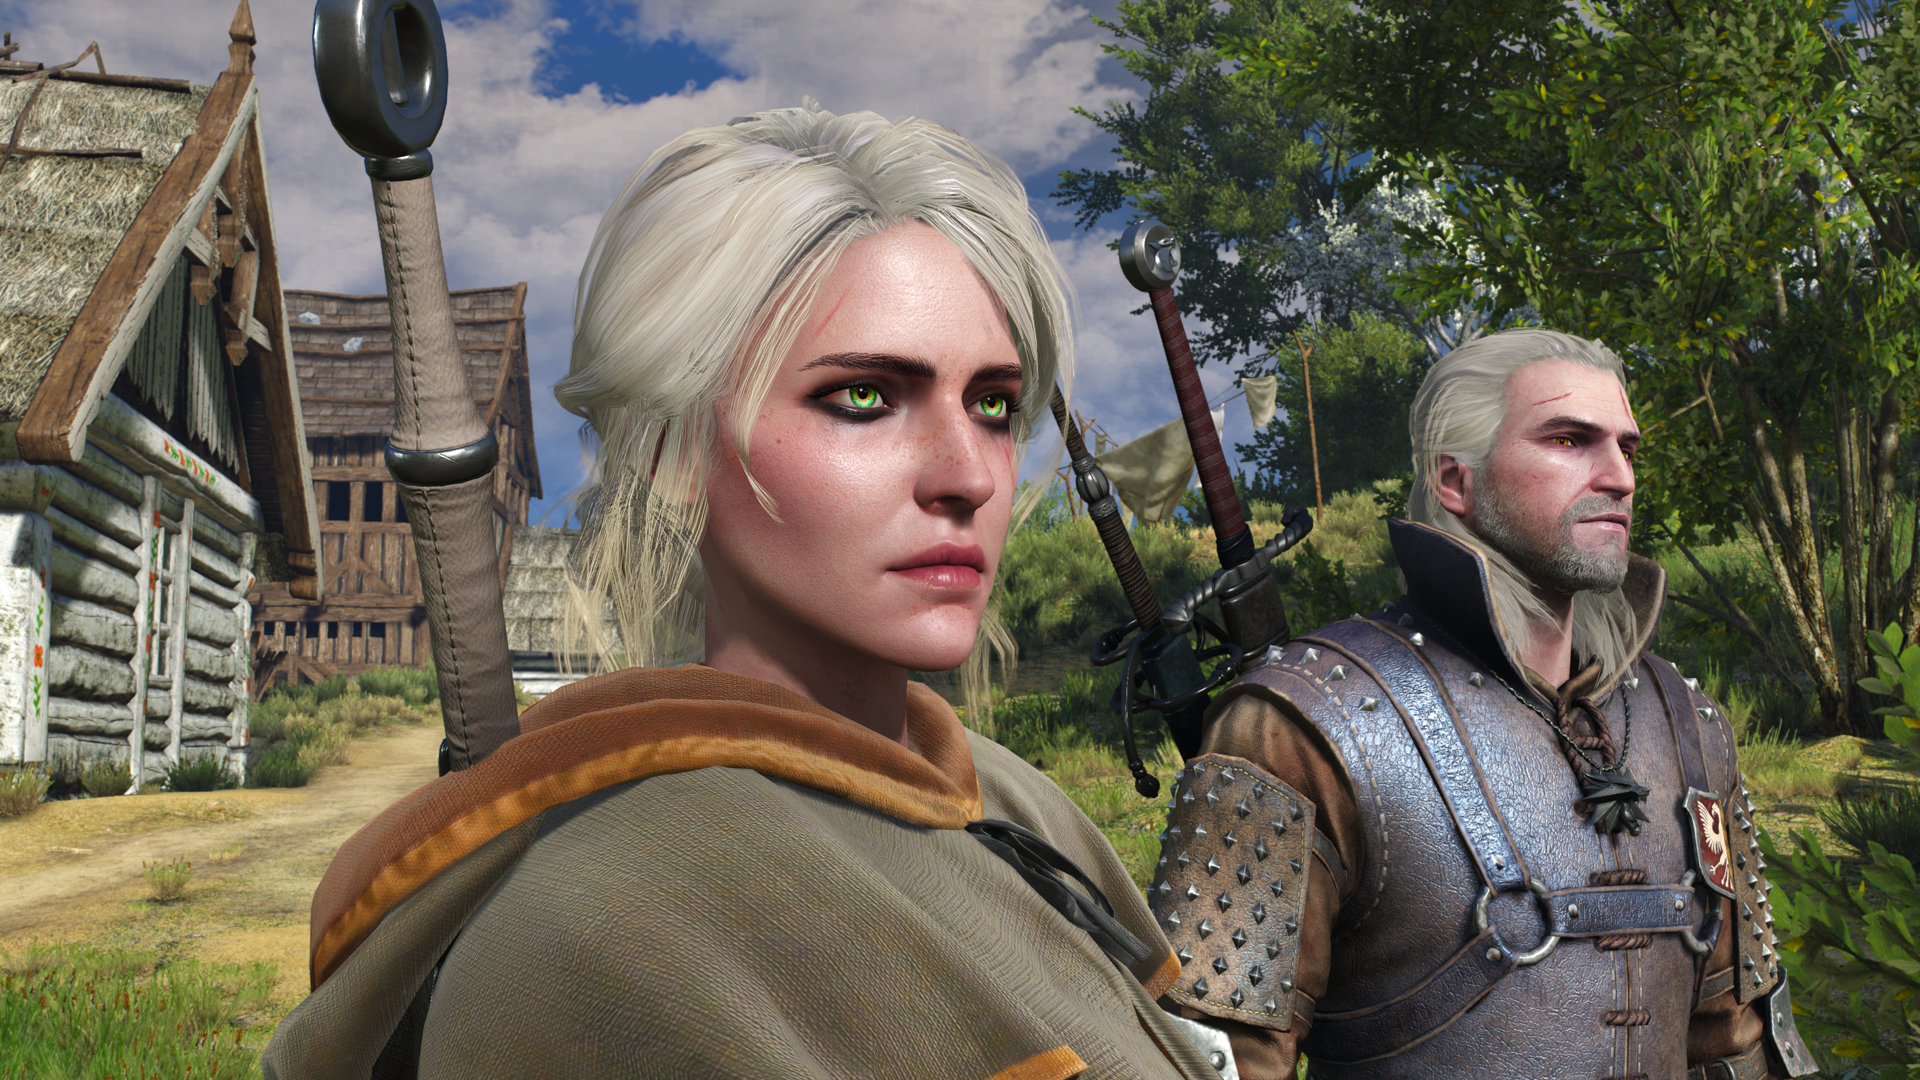 witcher3_2015_12_27_1bsryn.png